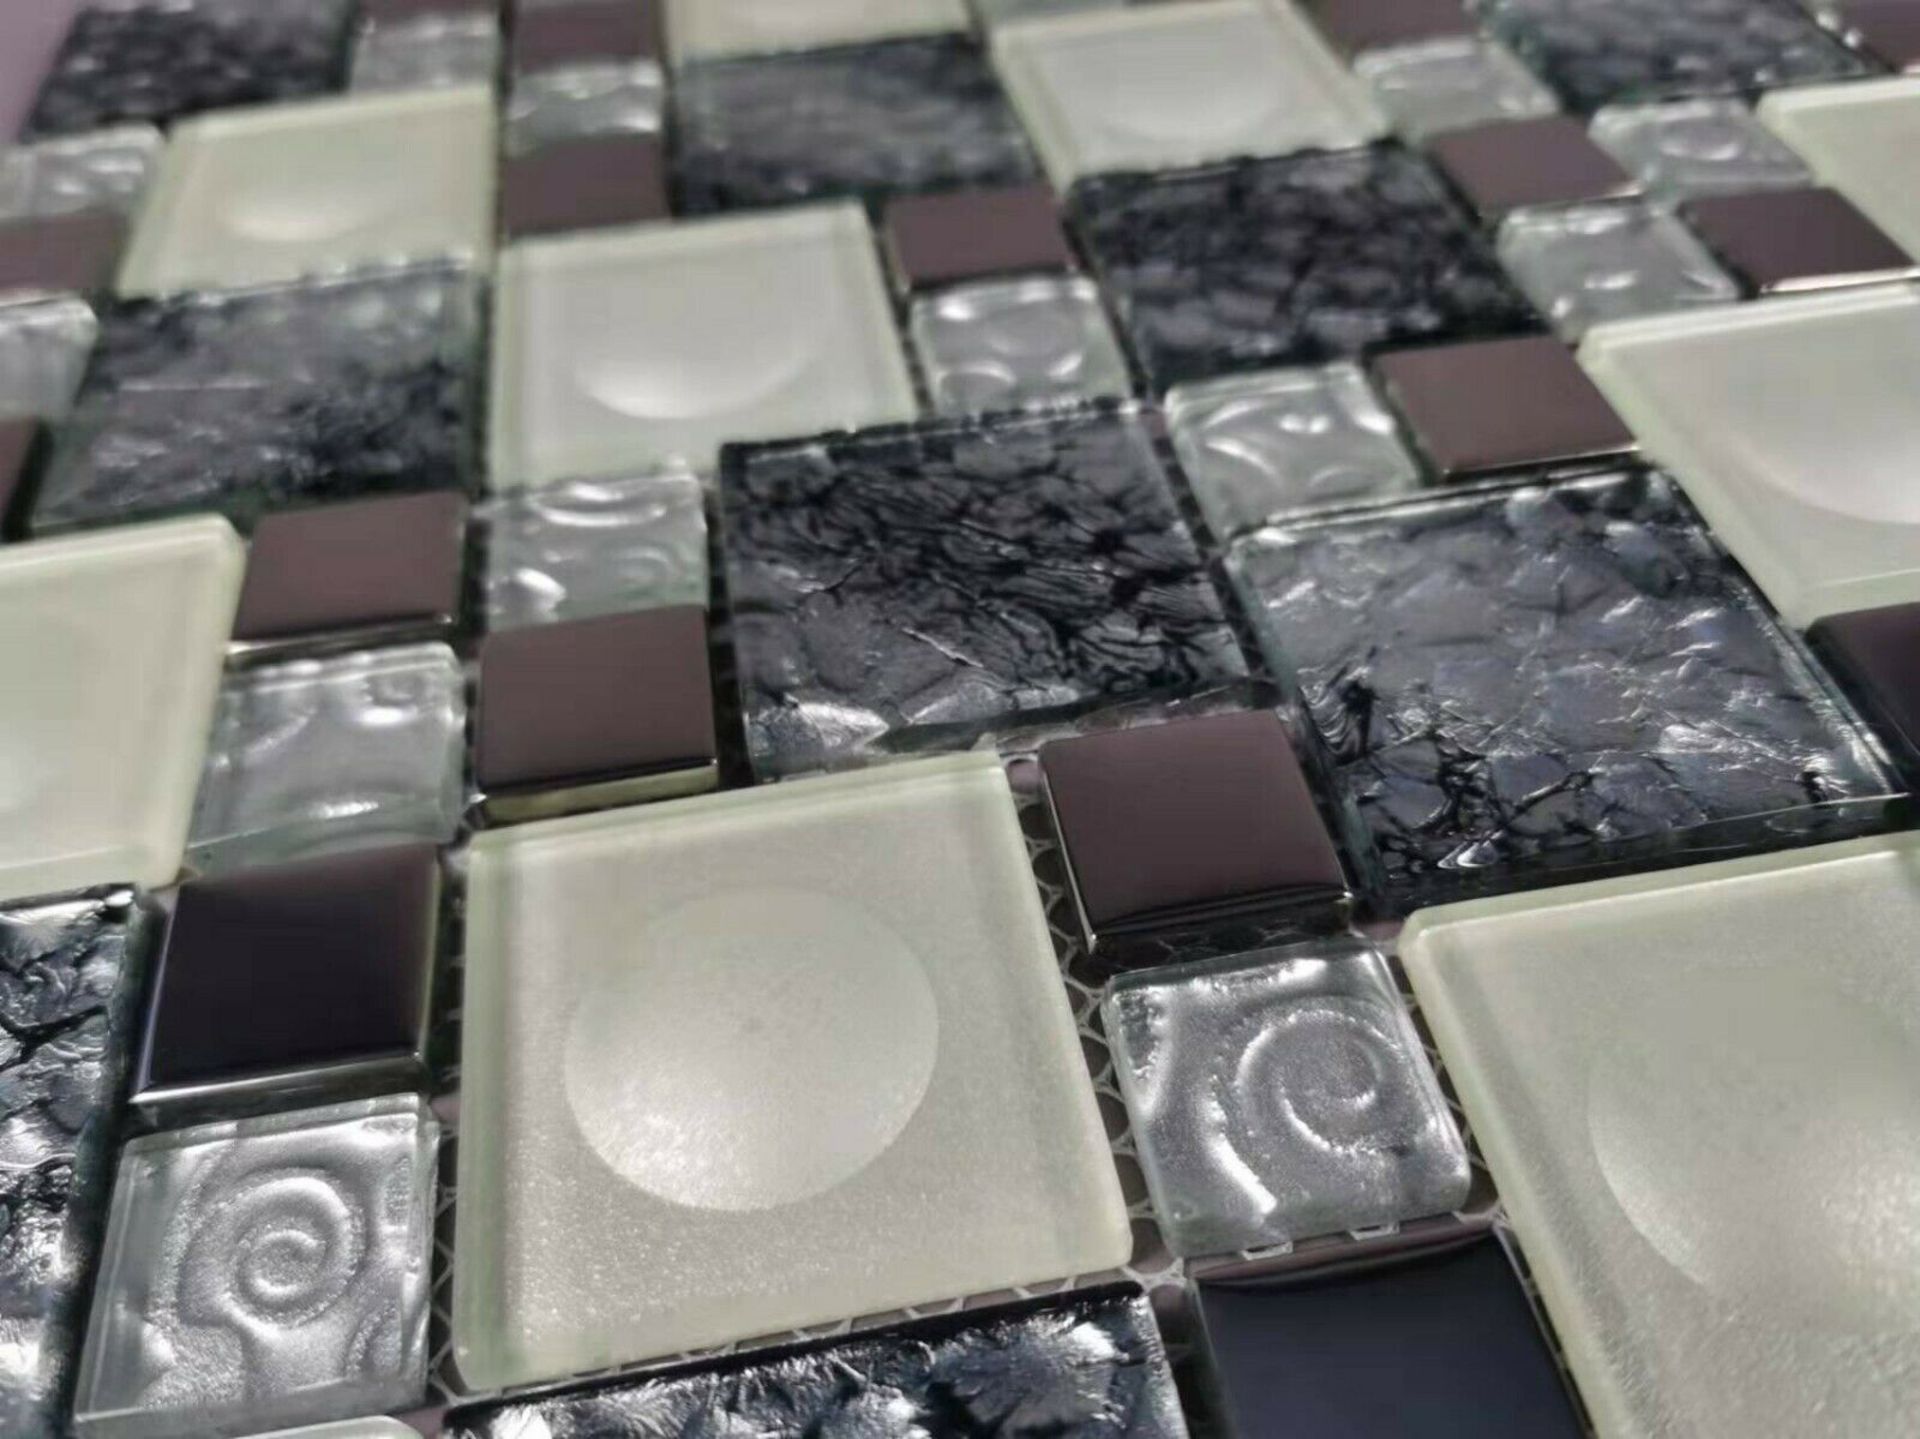 10 Square Metres - High Quality Glass/Stainless Steel Mosaic Tiles - Image 4 of 6